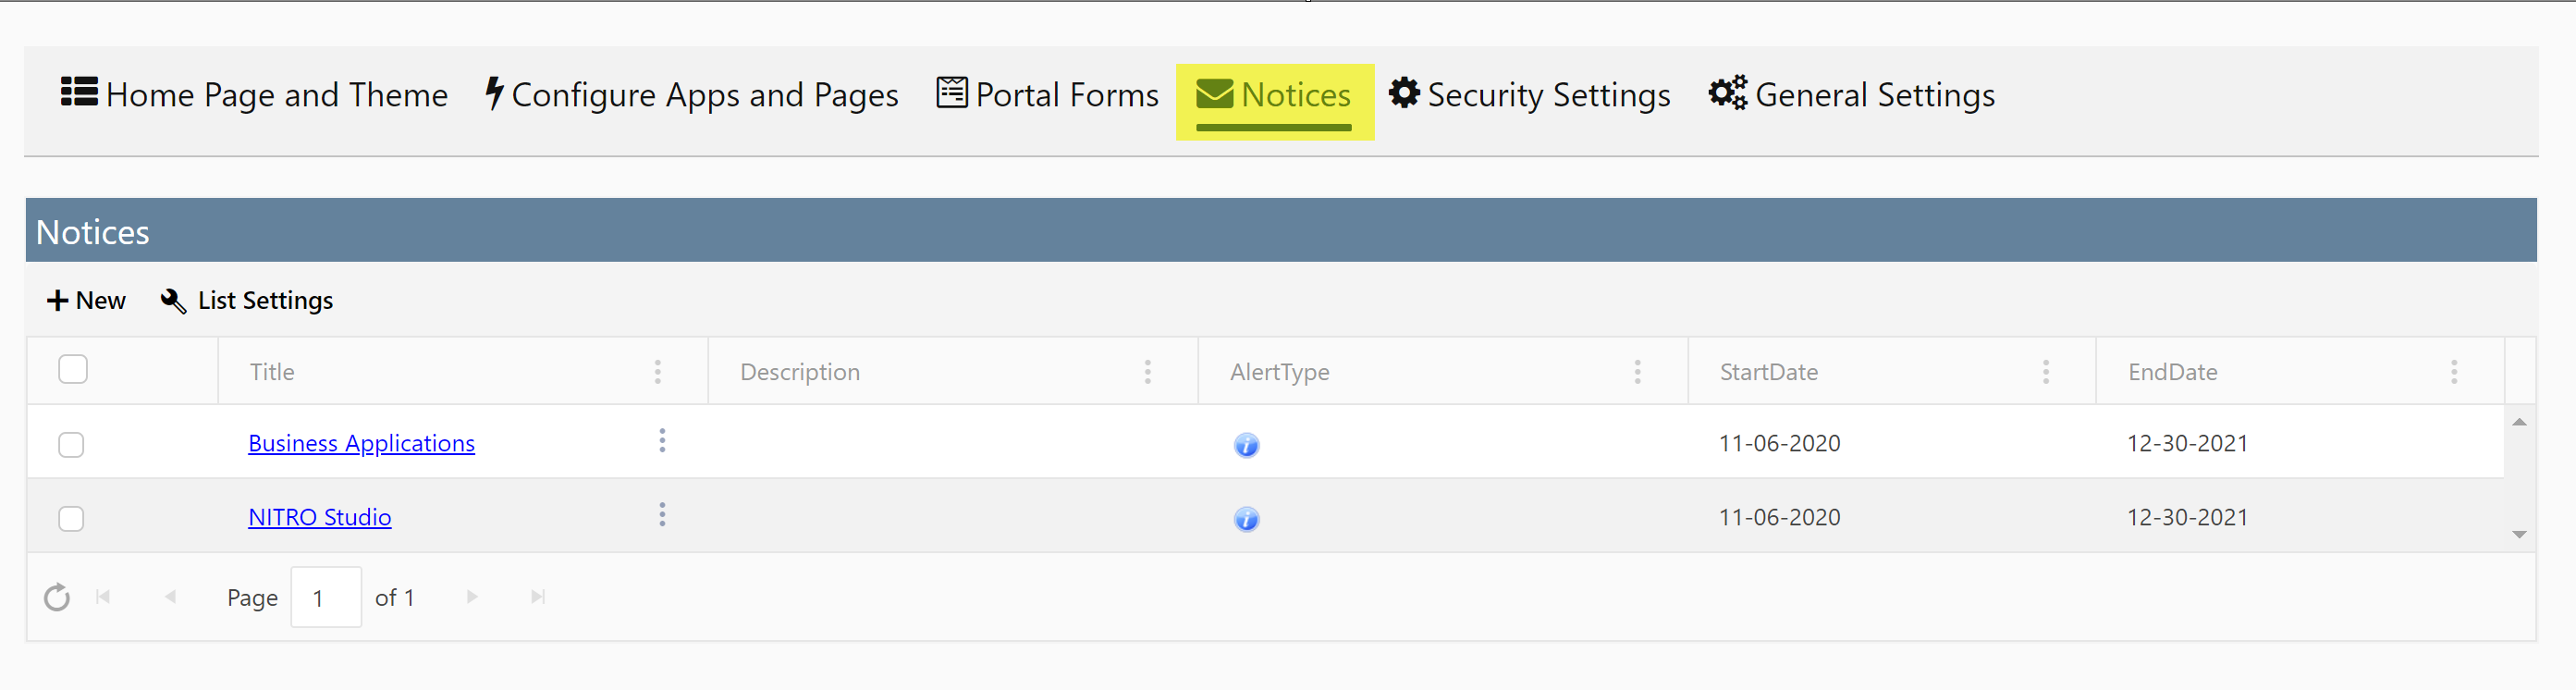 Notices in classic portal list